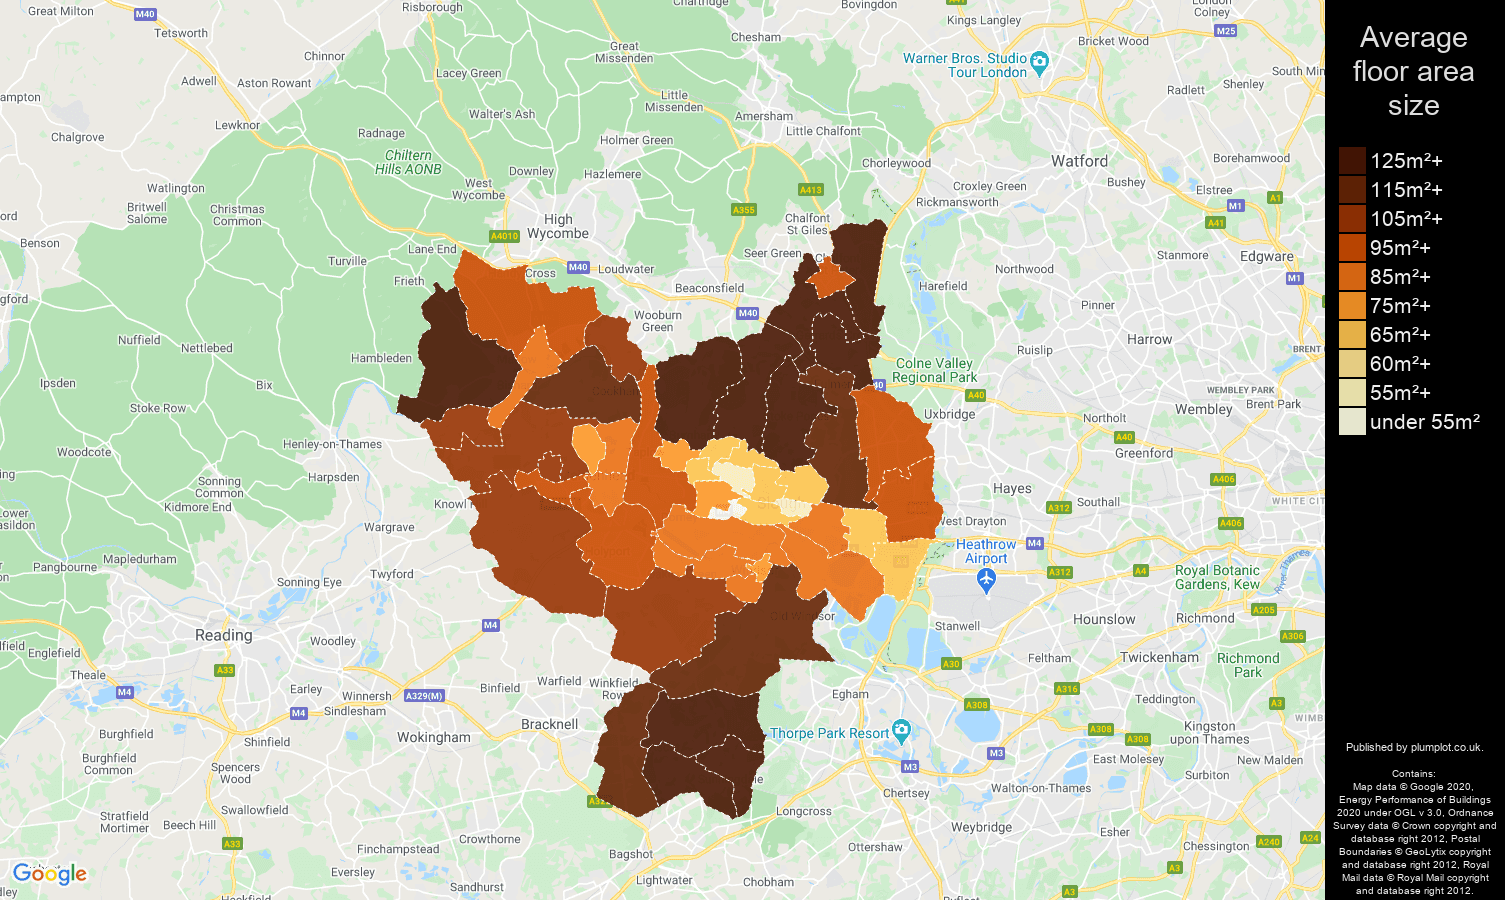 Slough map of average floor area size of properties